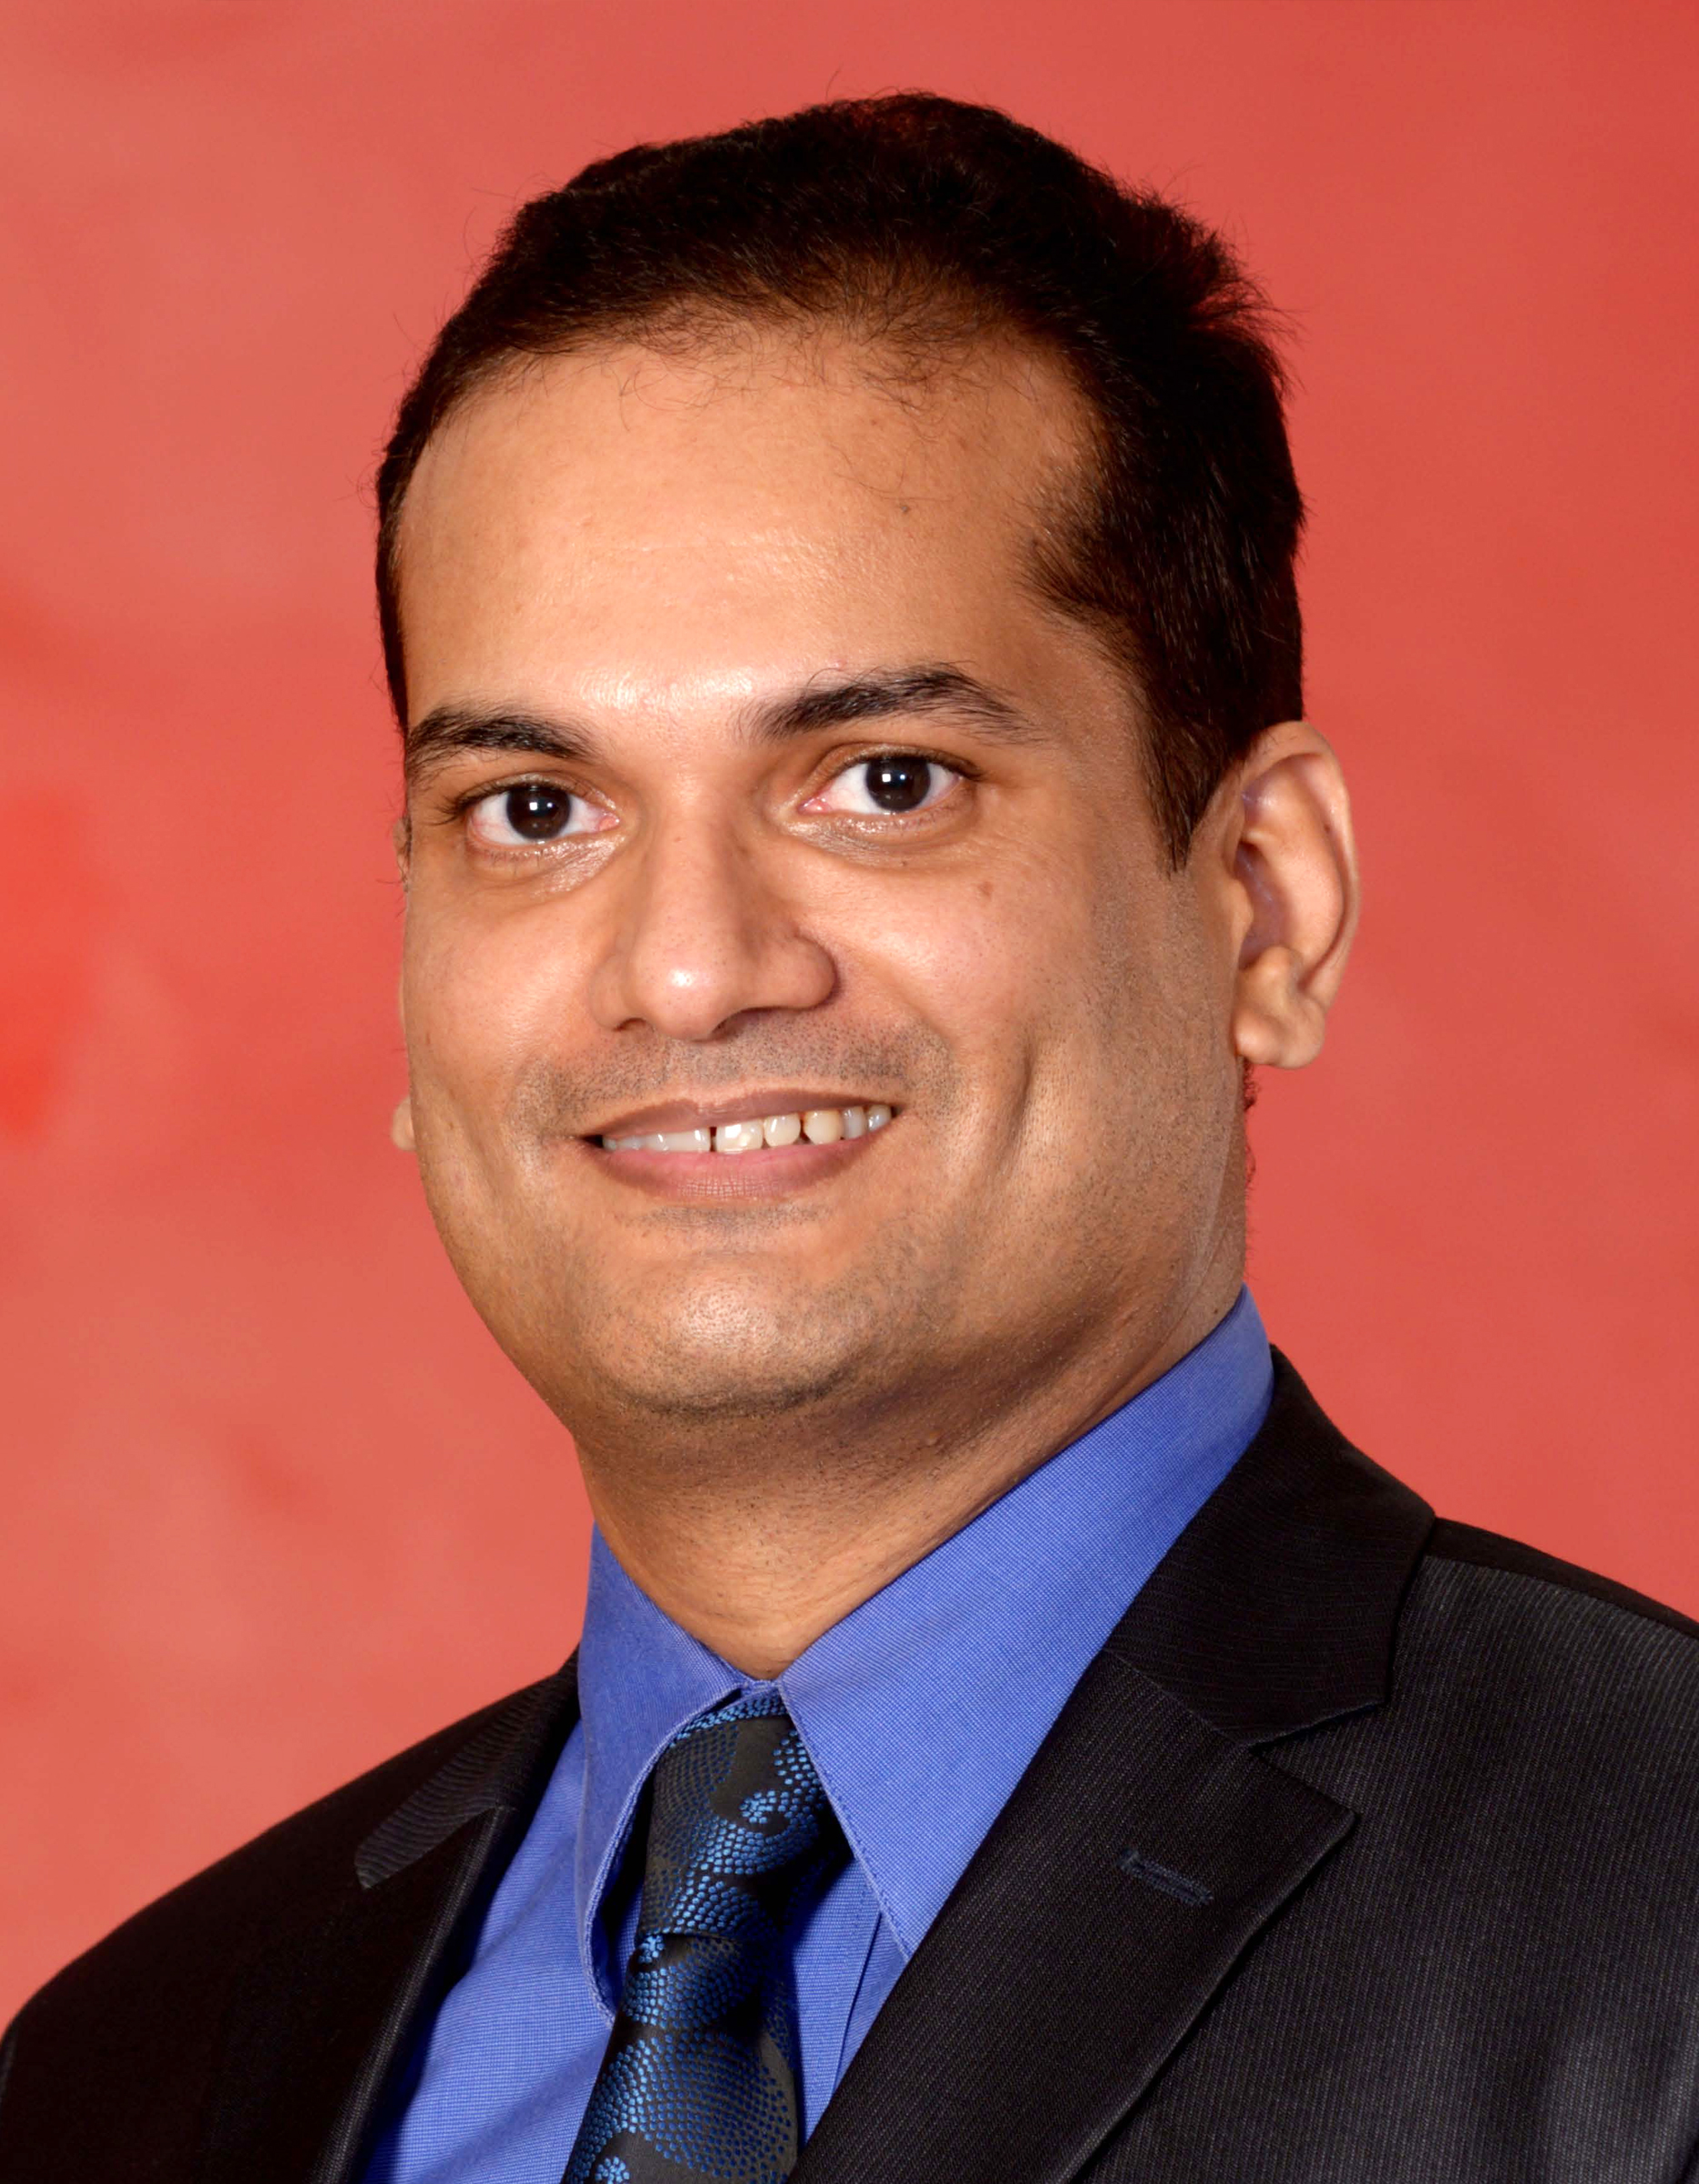  Vinay Pradhan, <span>Country Head - India & South Asia, Udemy Business</span>